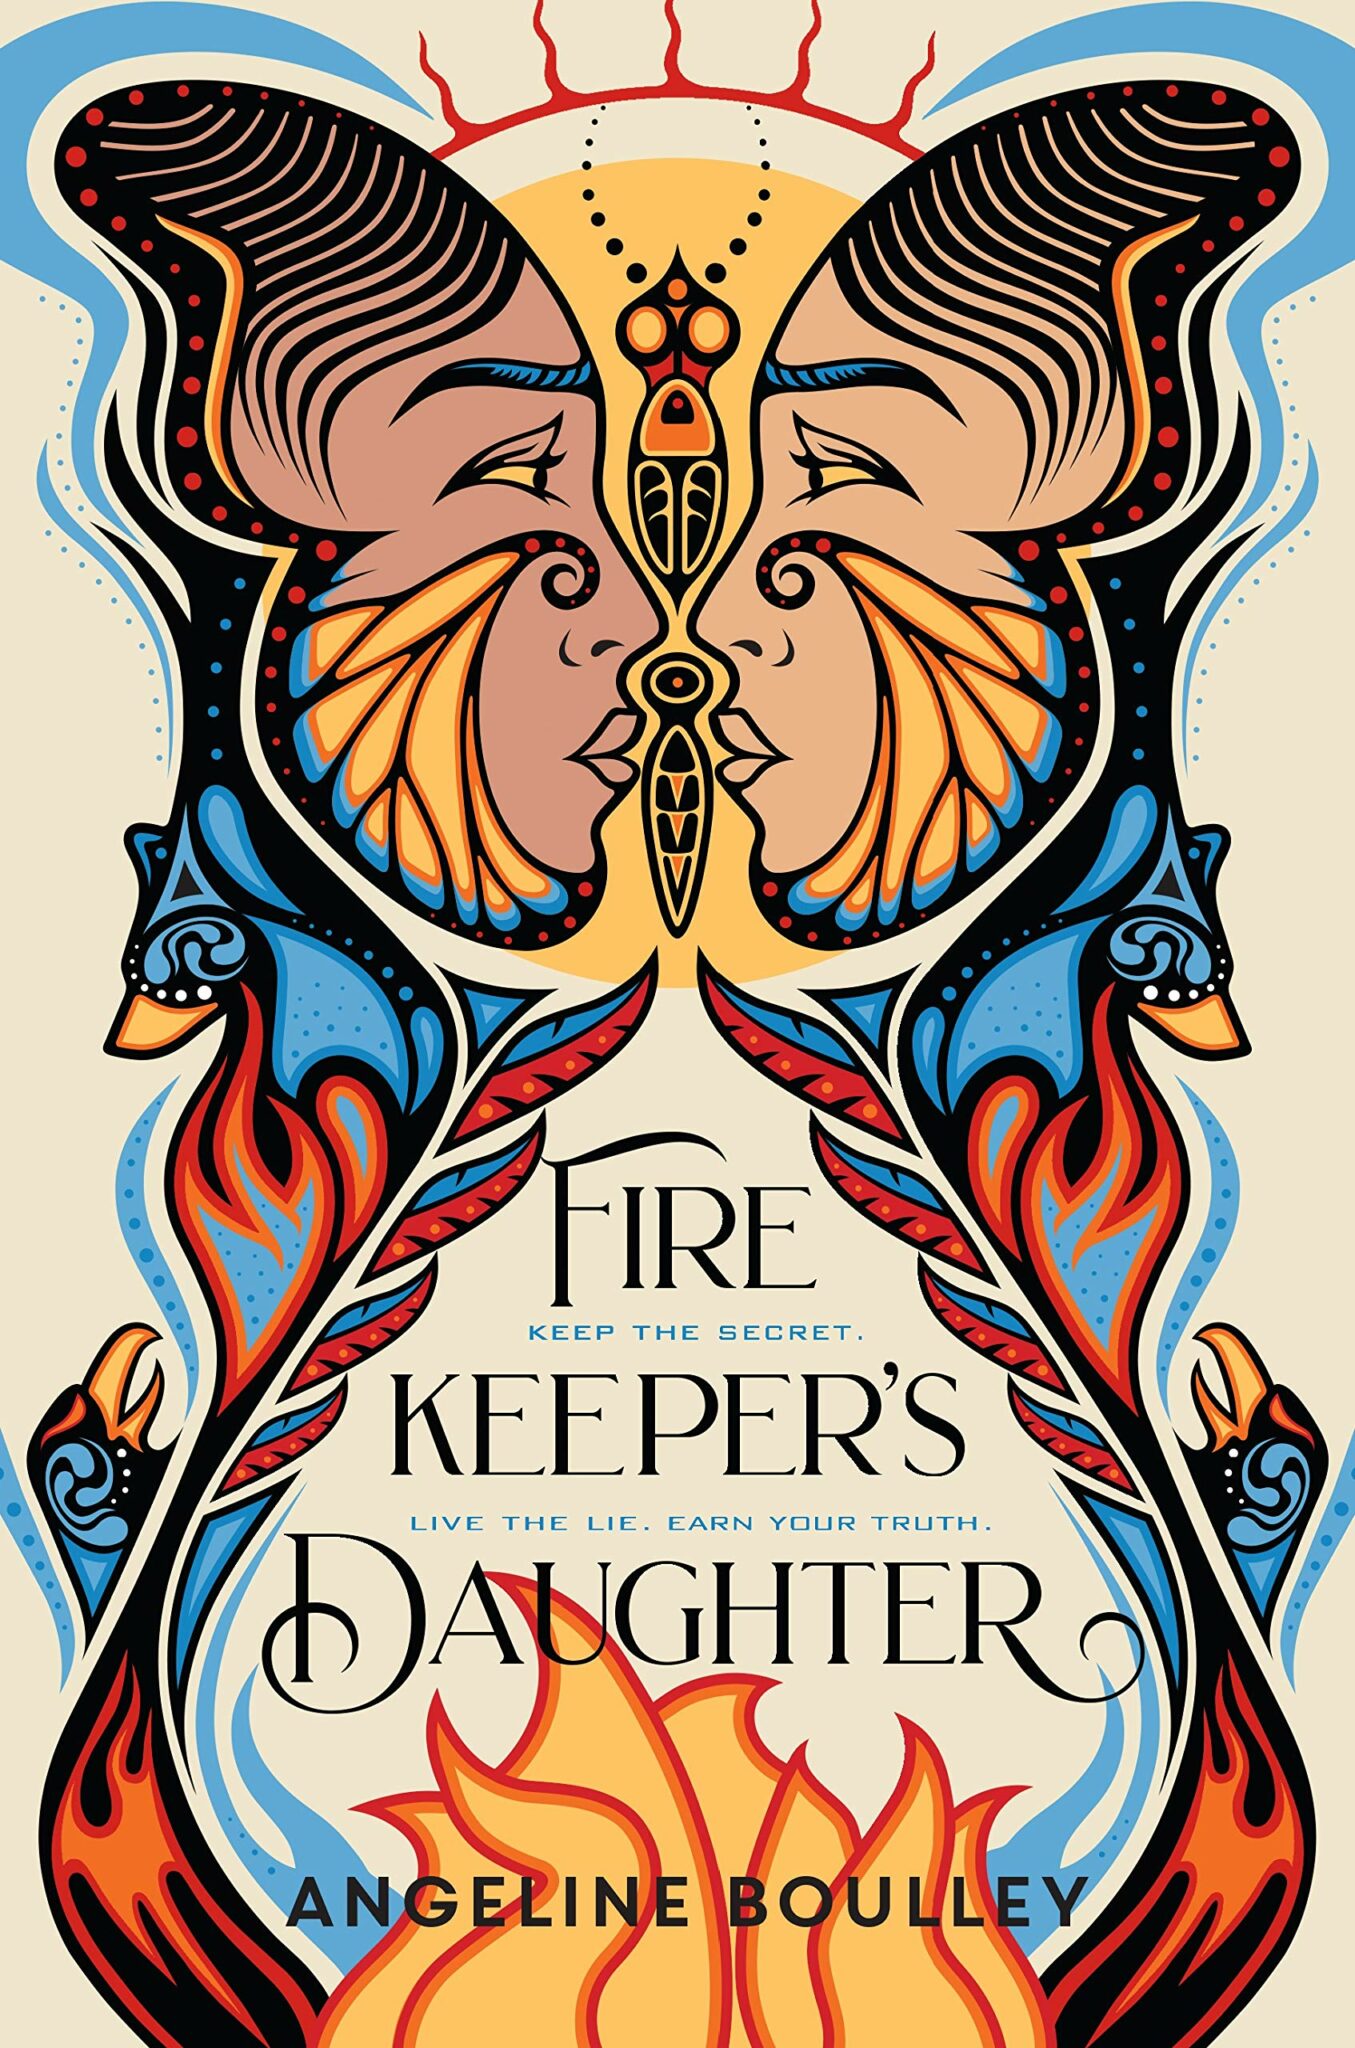 Angeline Boulley's debut novel the Firekeepers Daughter